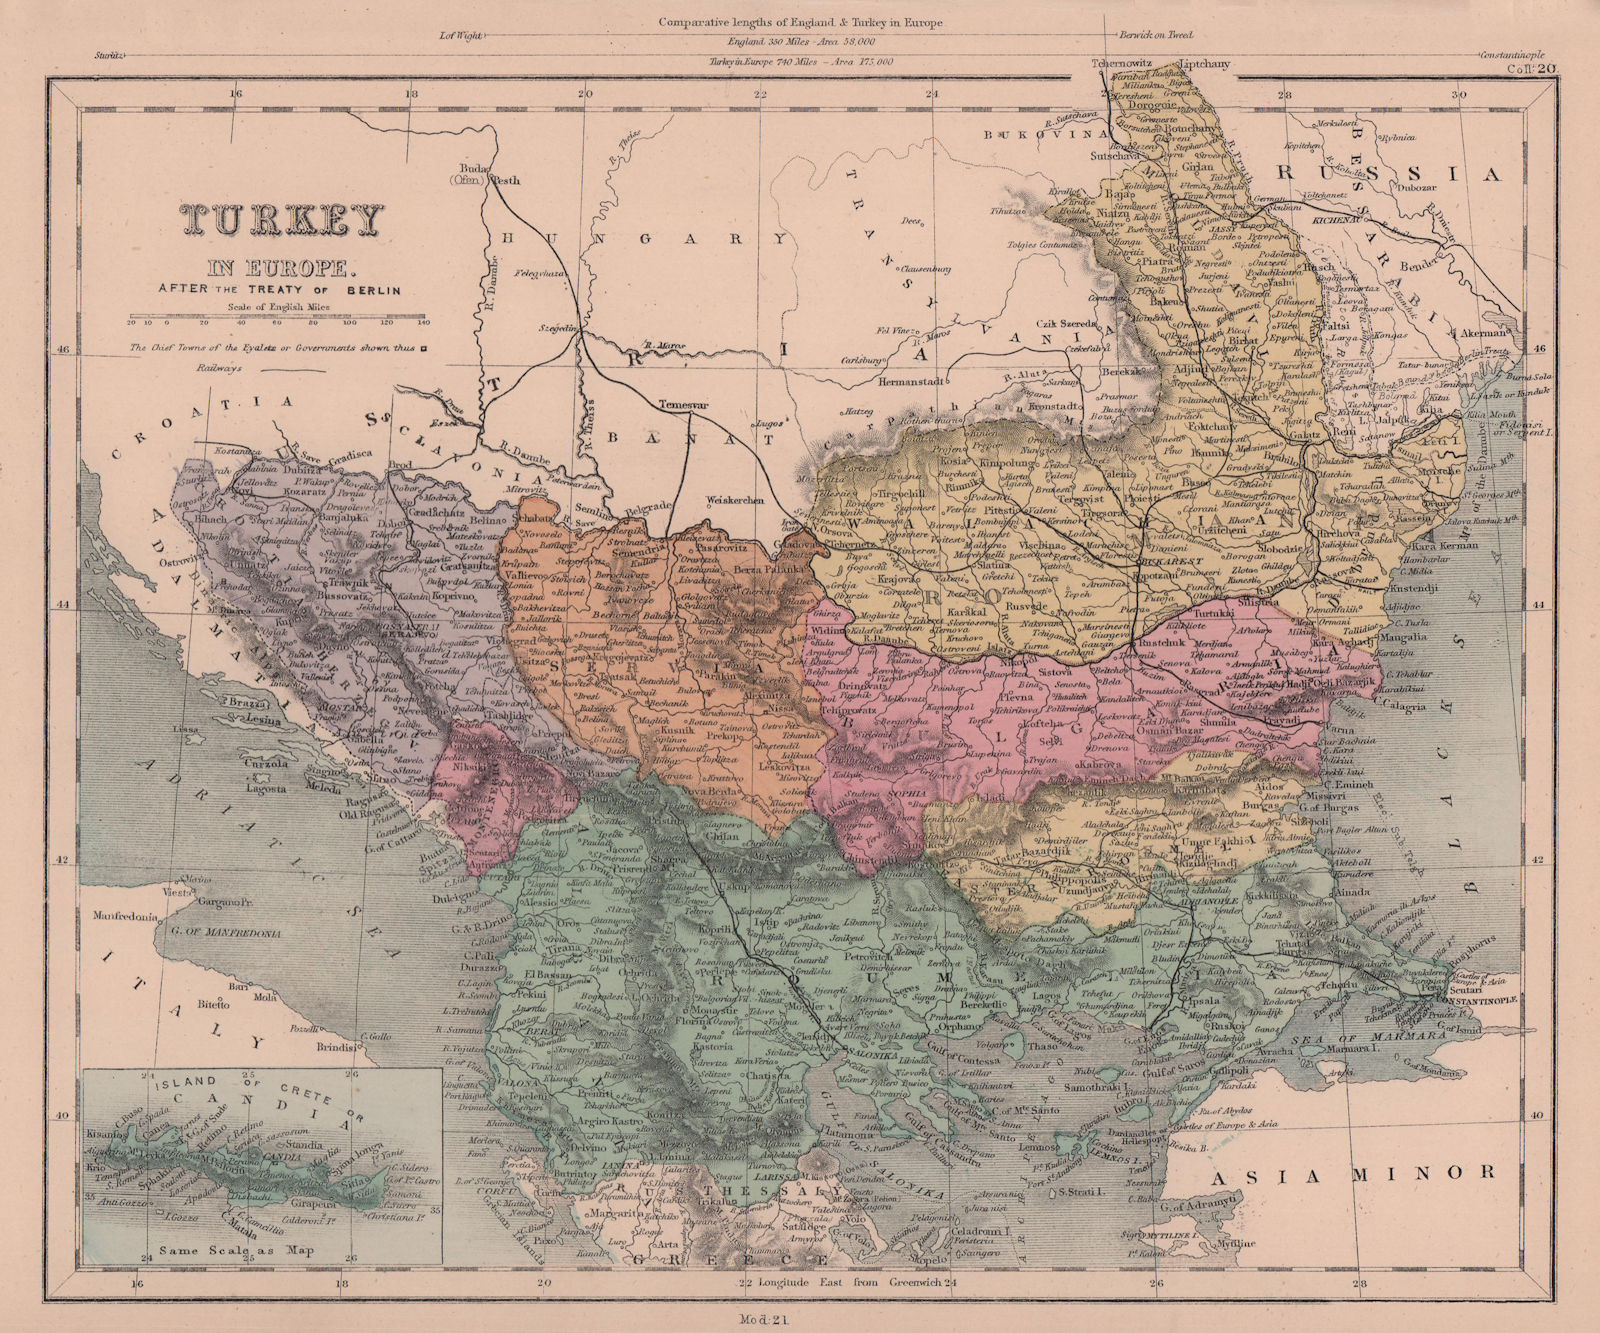 Turkey In Europe after the Treaty of Berlin. Balkans. HUGHES 1876 old map